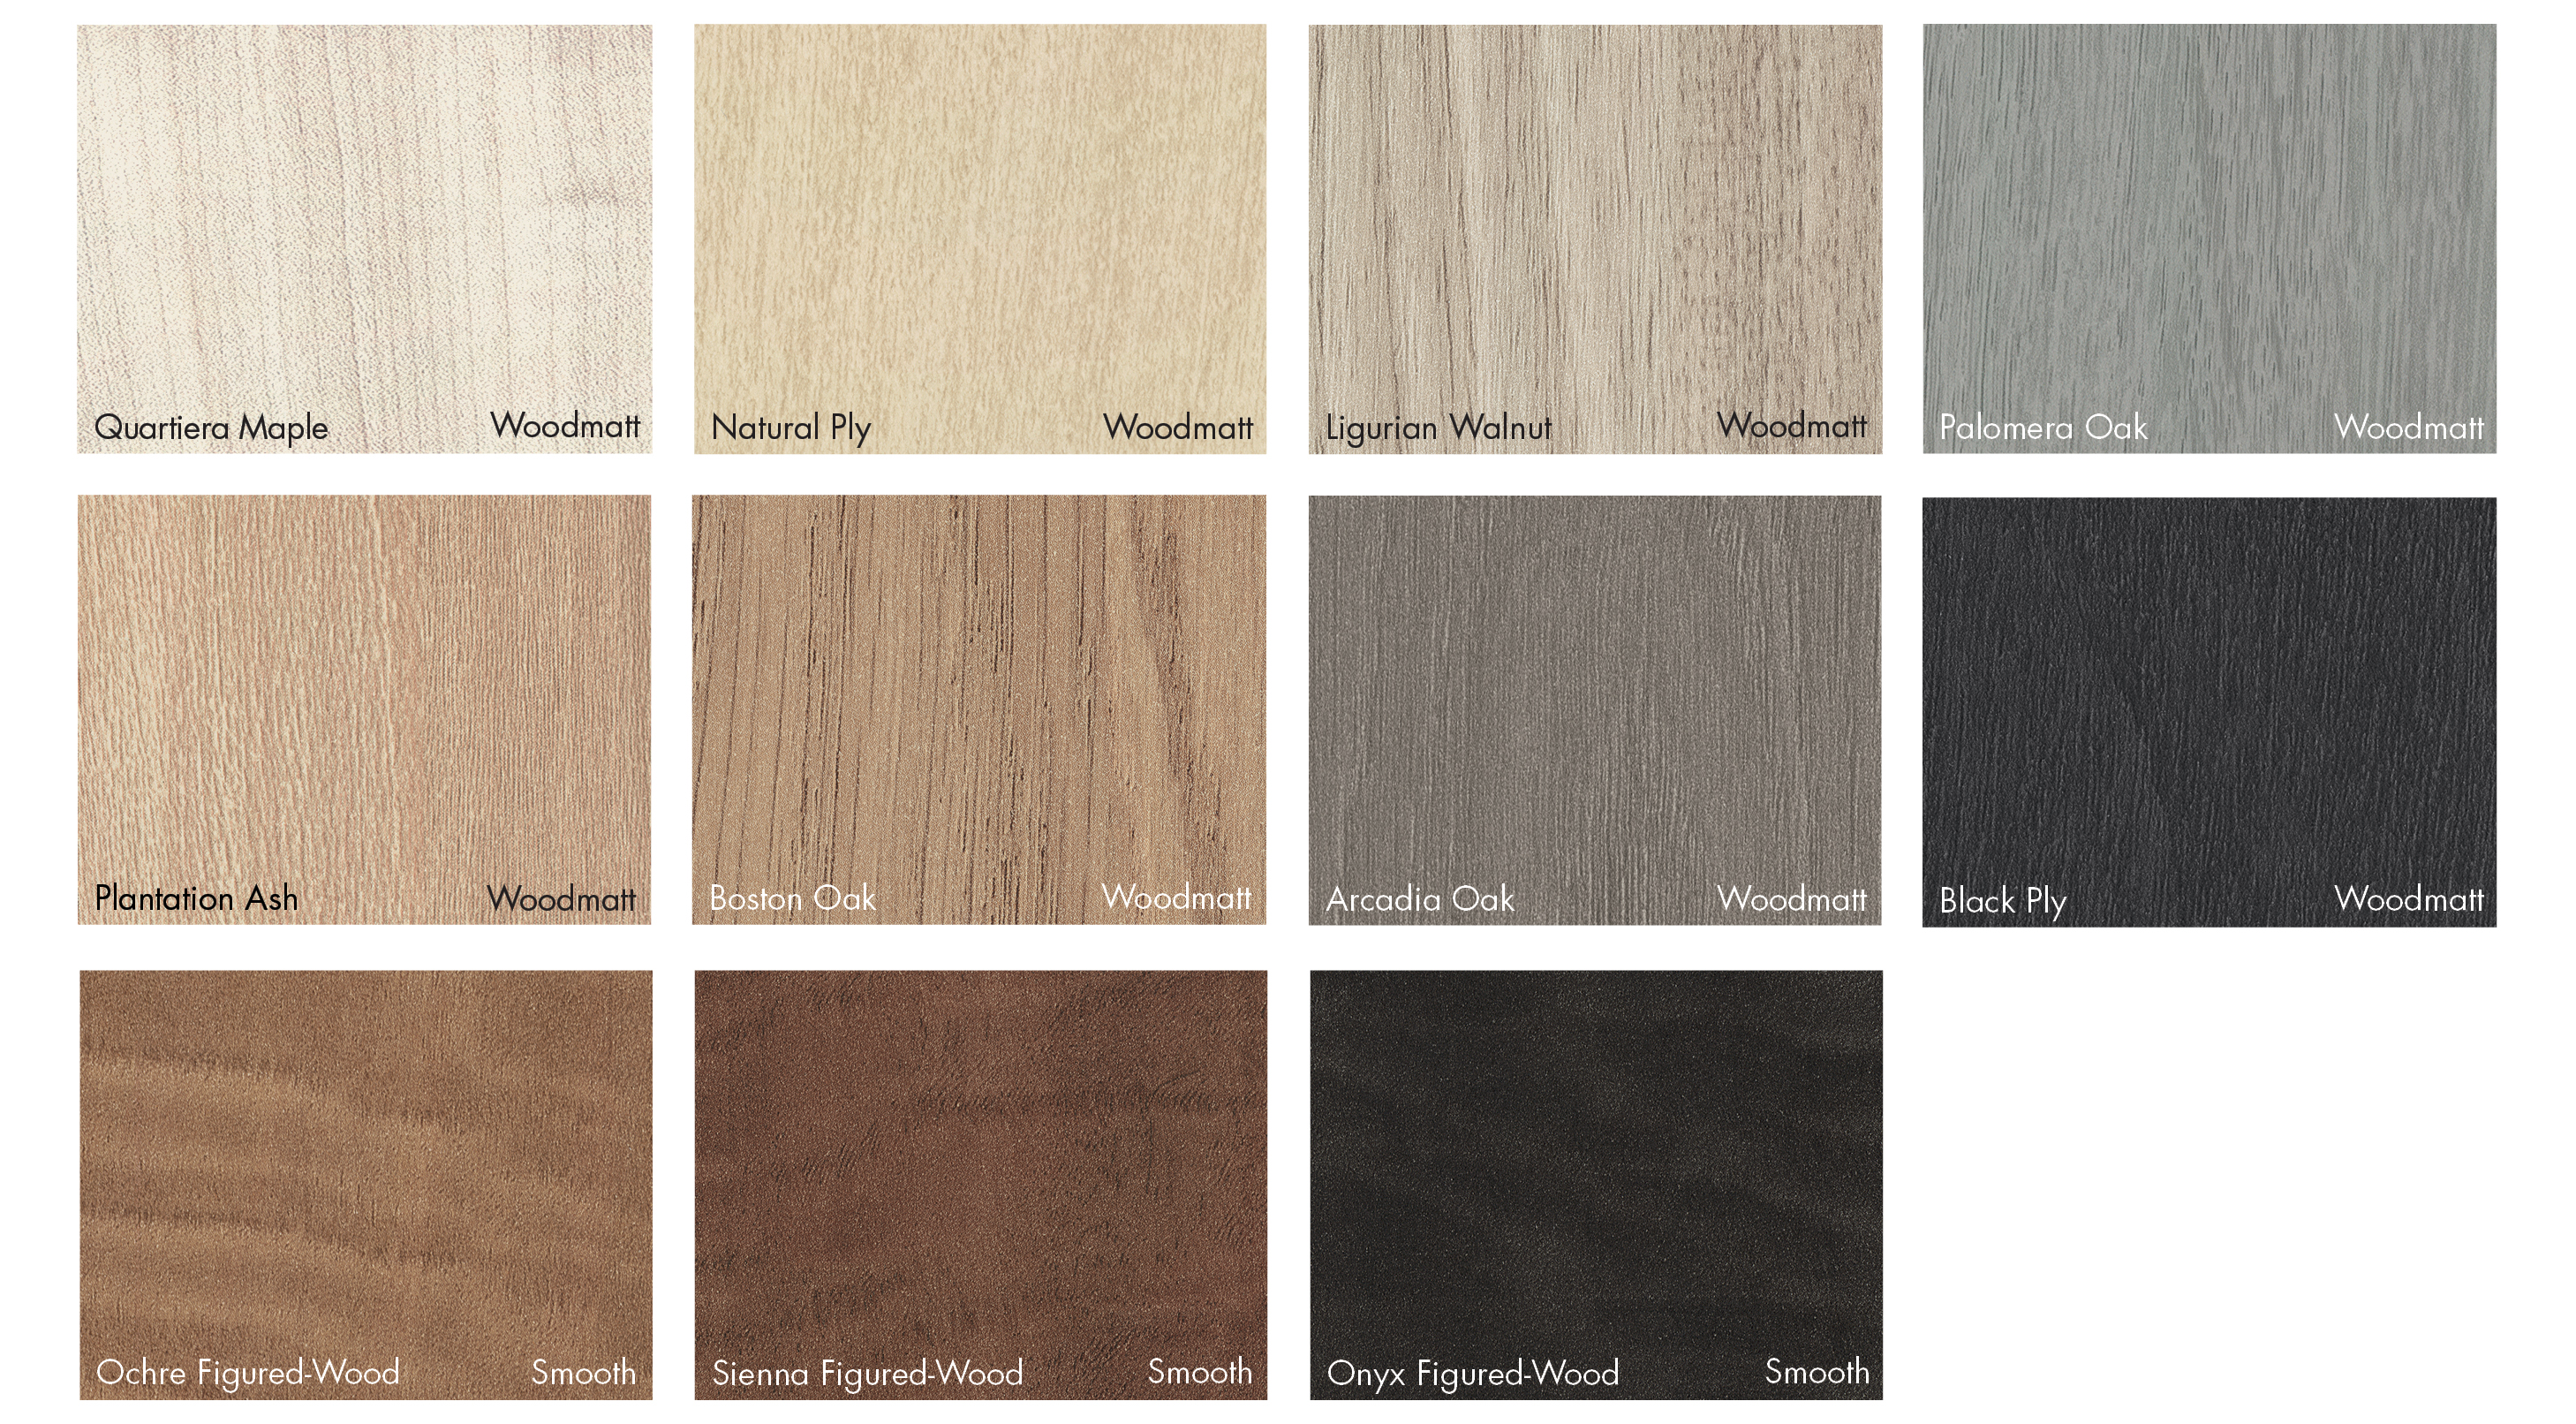 New Timber Colour Range from Polytec.